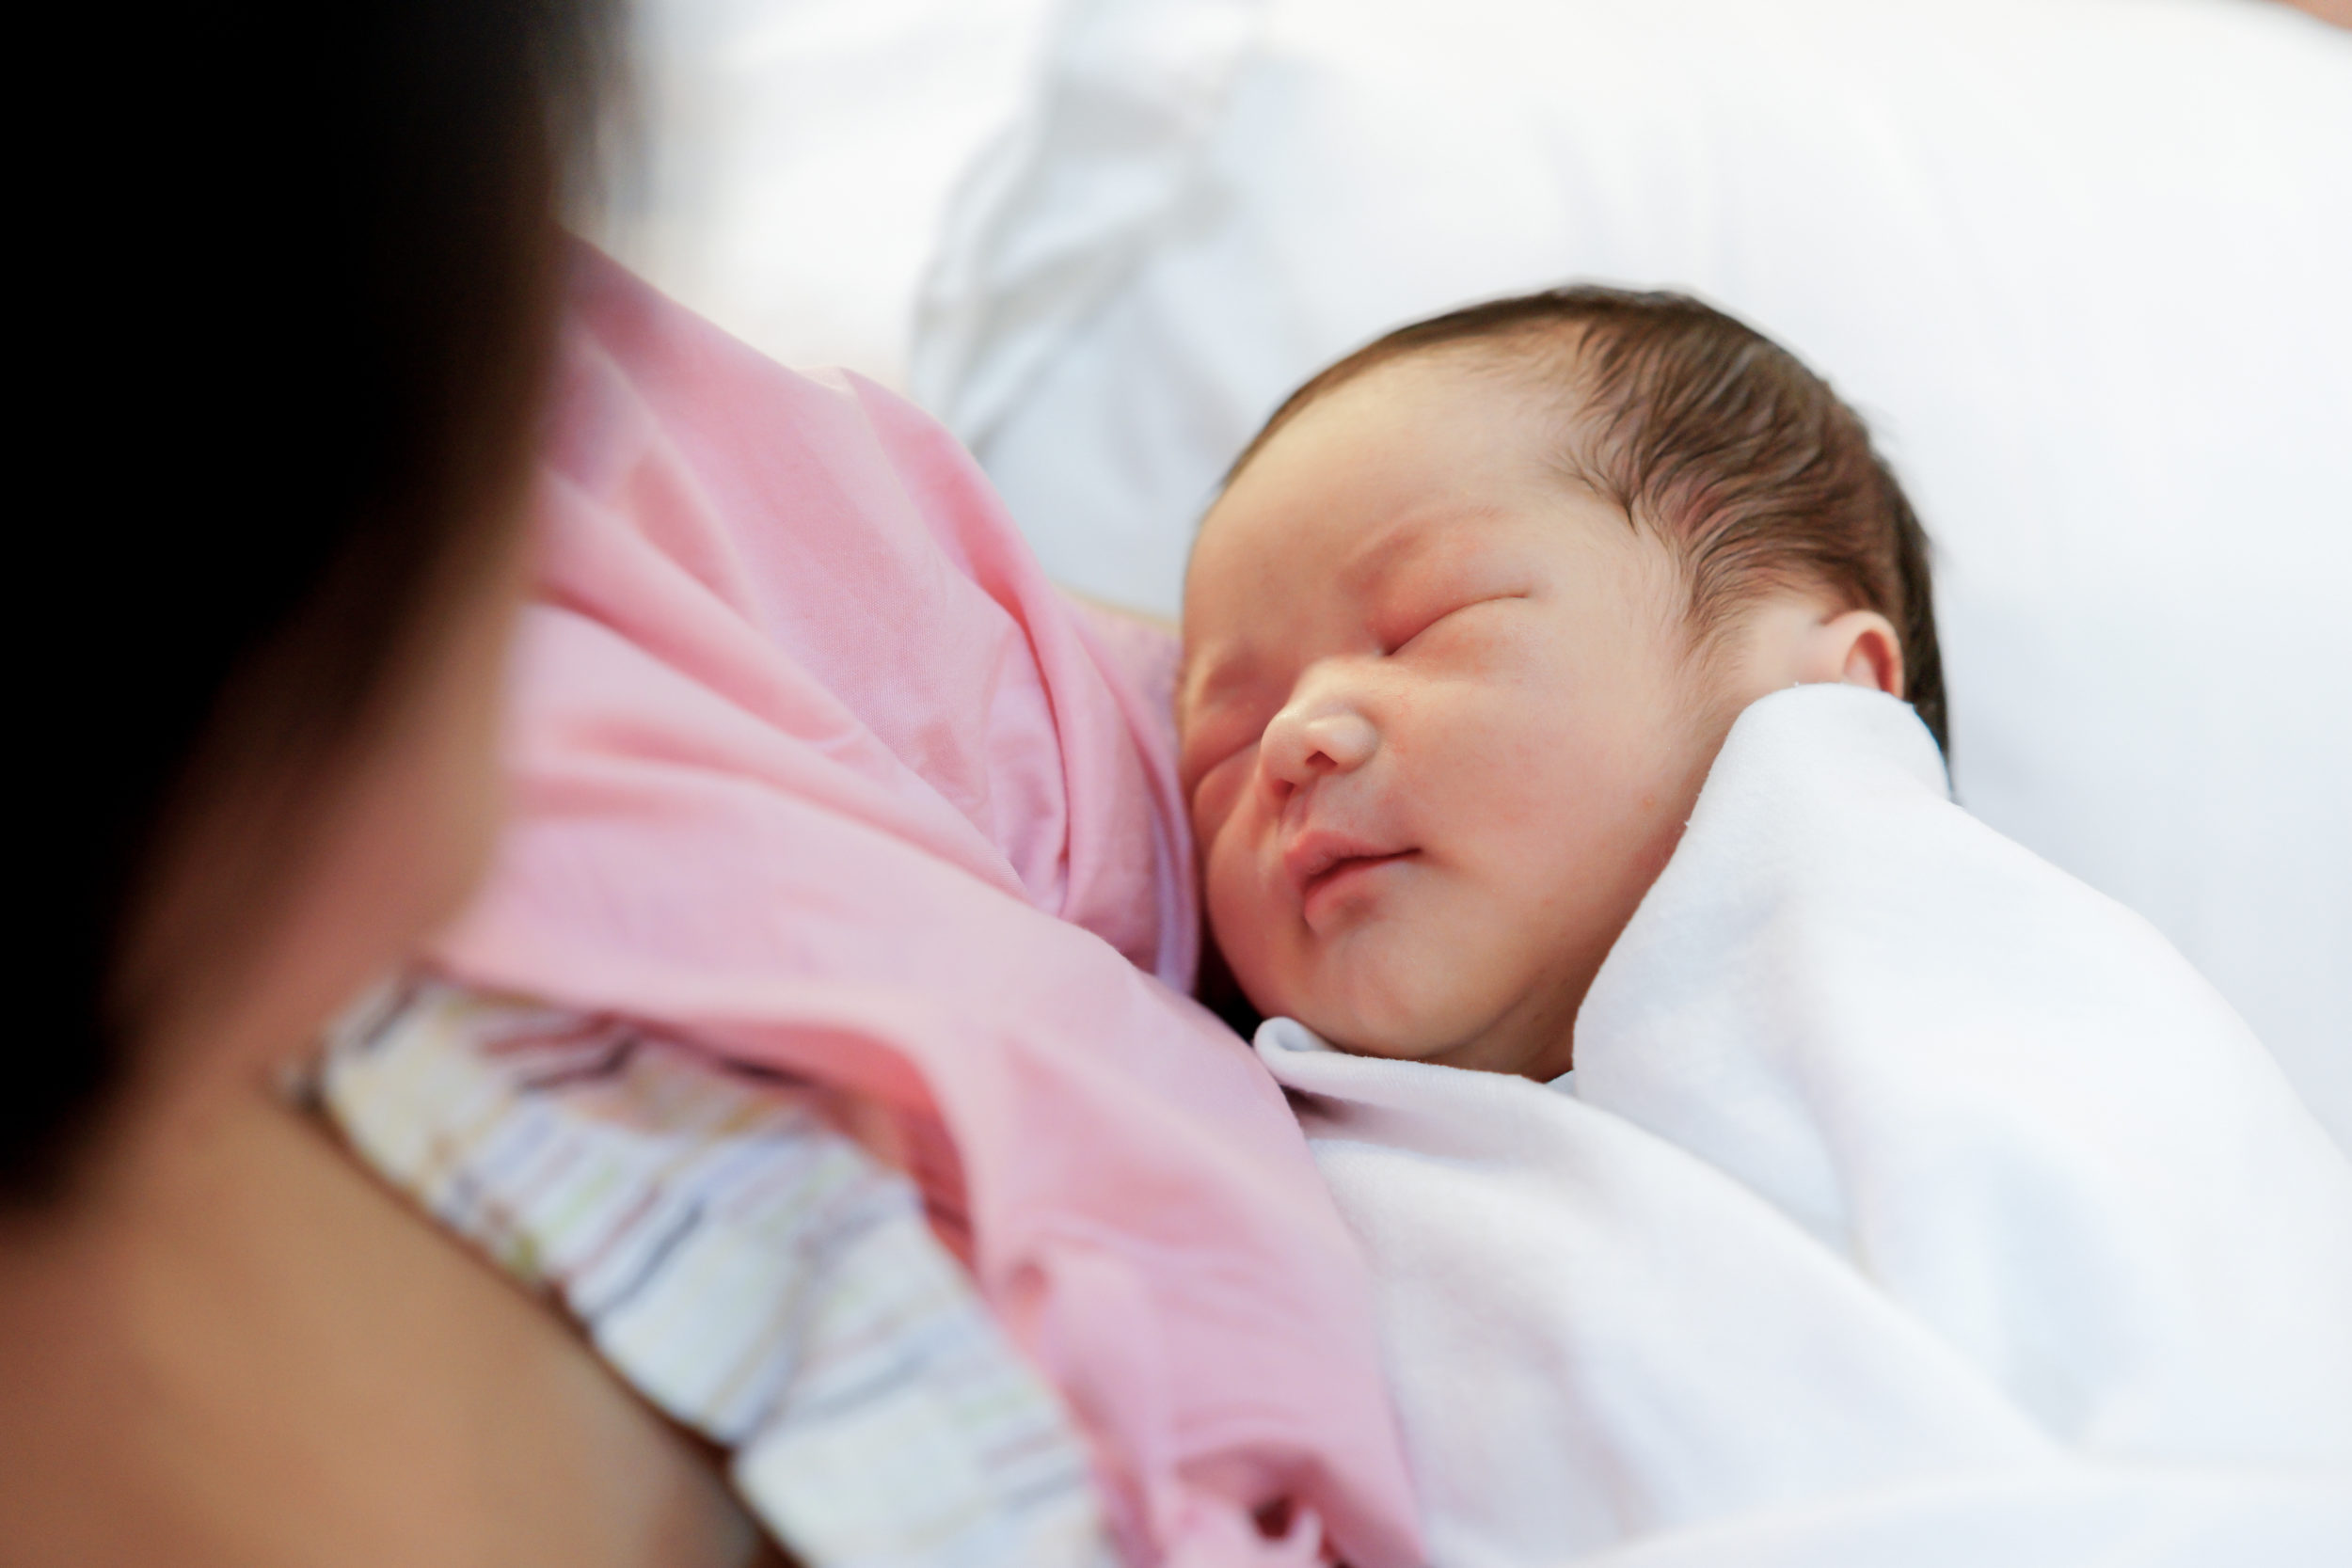 Where Should Your Baby Be Born? 6 Things to Look for When Choosing ...